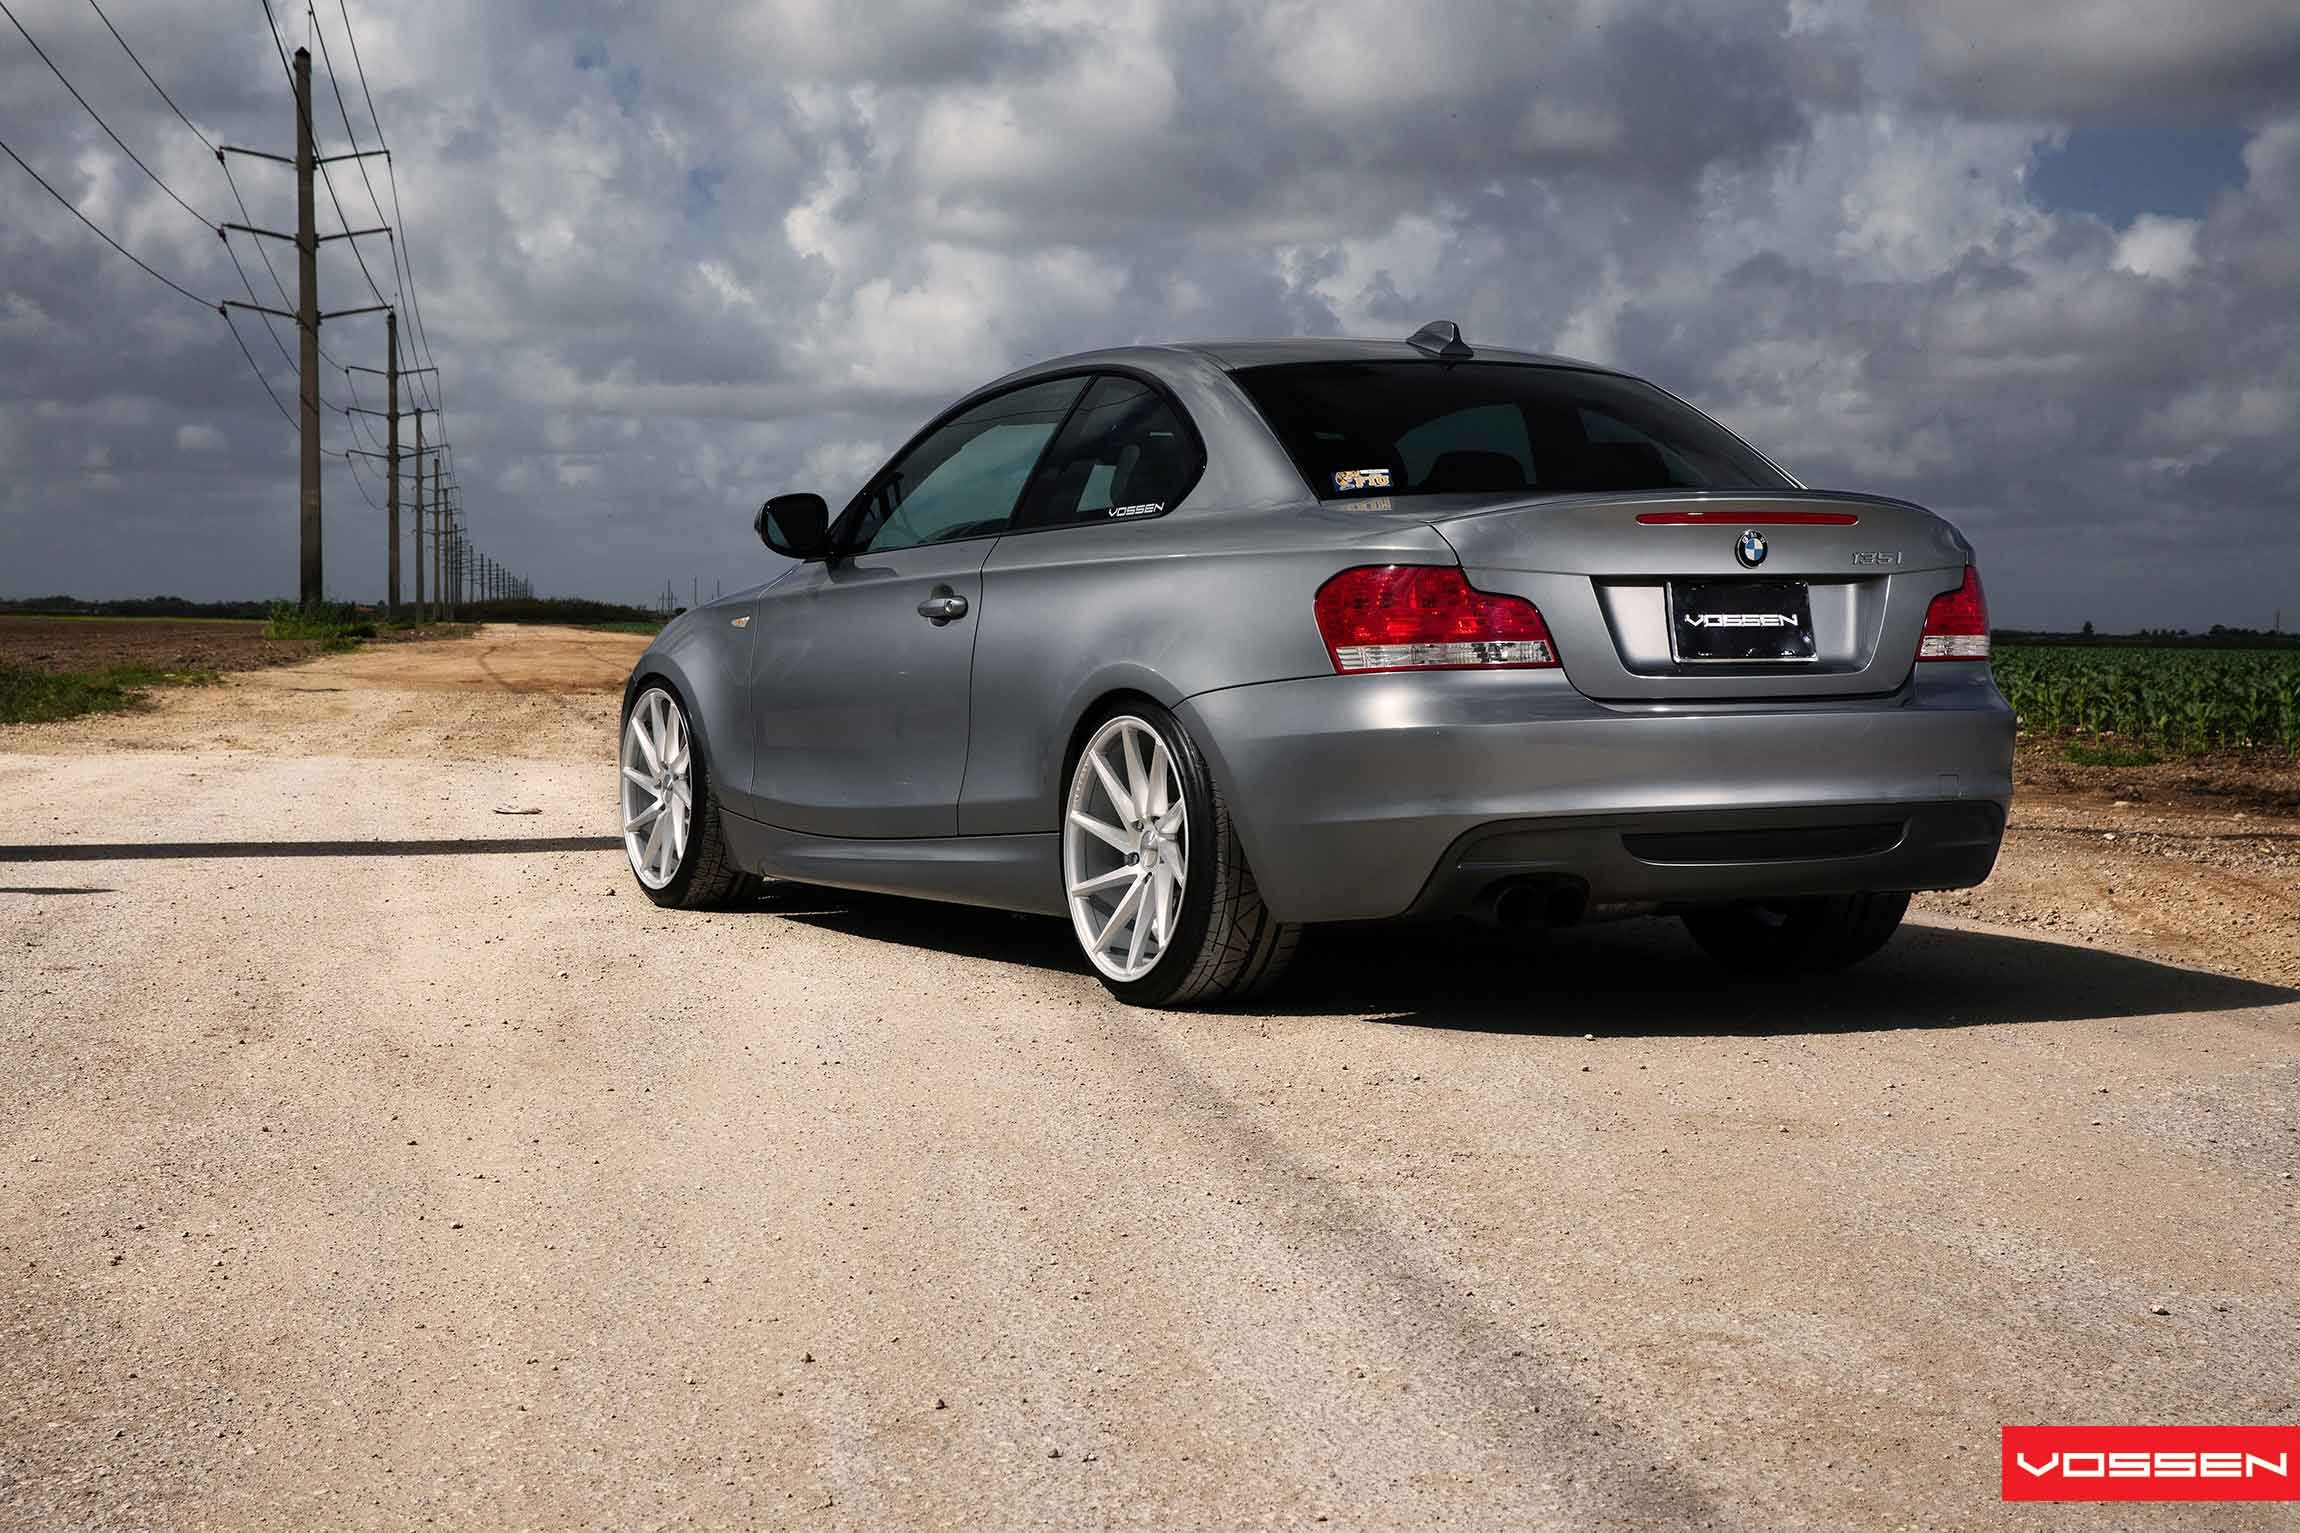 Rear Bumper Cover on Silver BMW 1-Series - Photo by Vossen